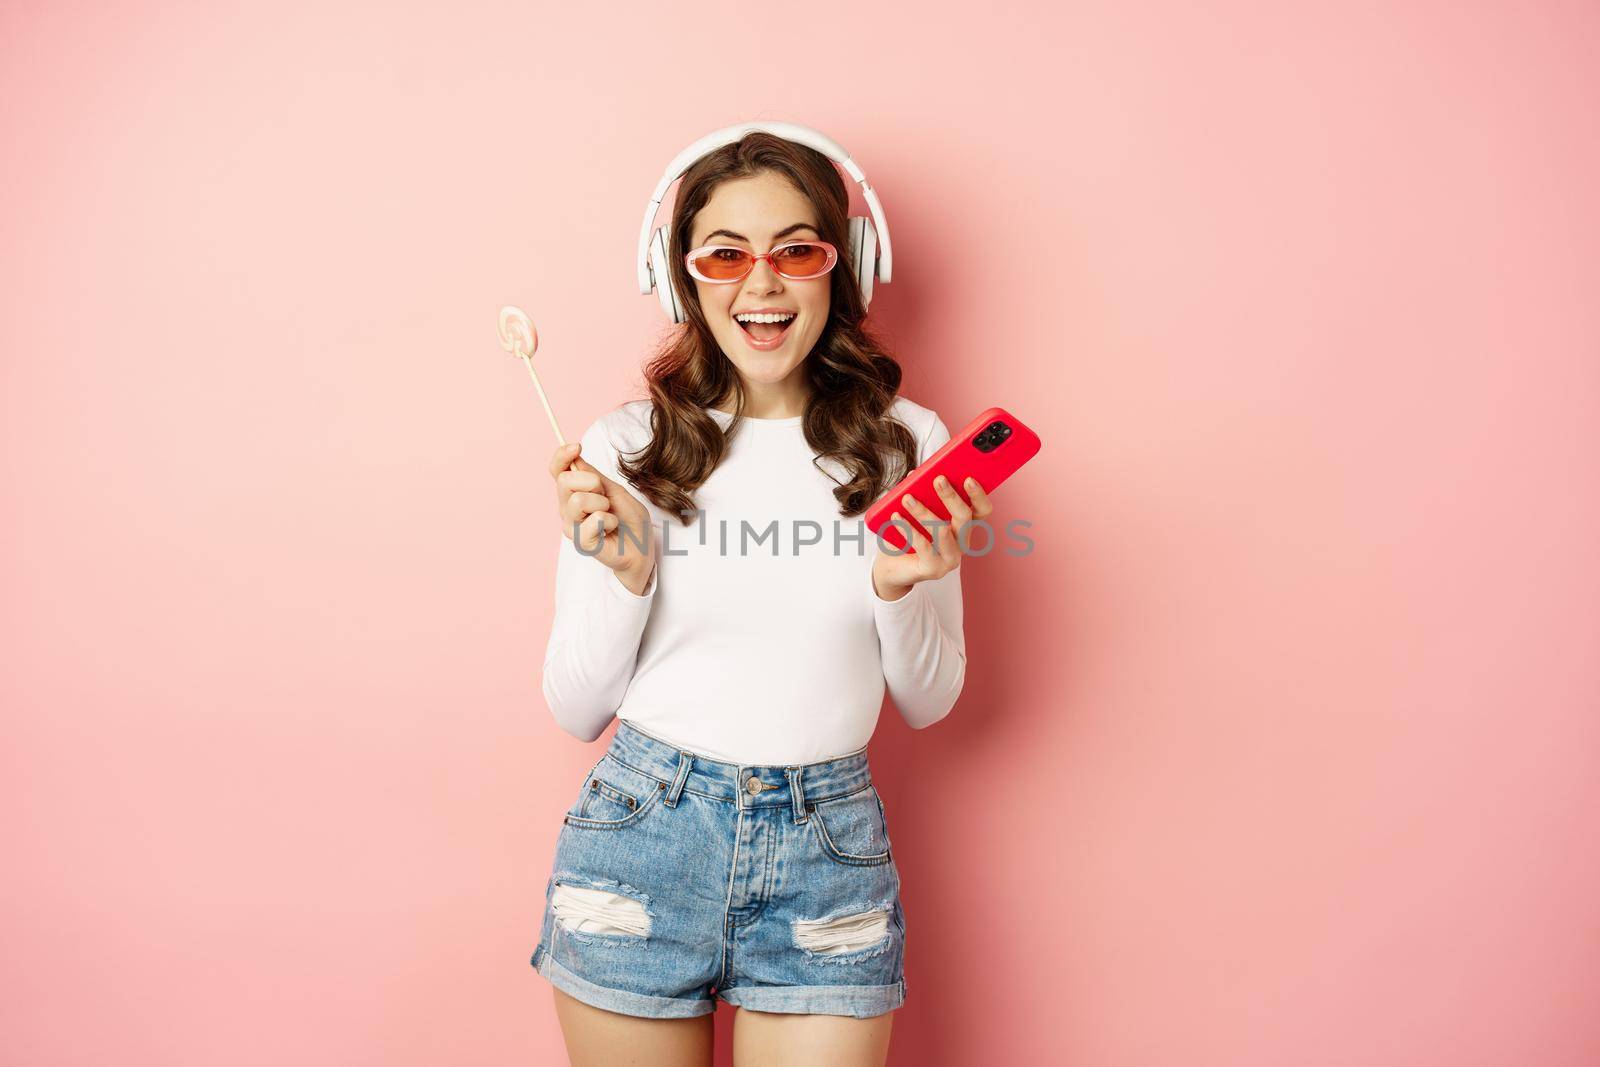 Stylish summer girl dancing with smartphone and lolipop, listening music in headphones, standing in sunglasses against pink background.